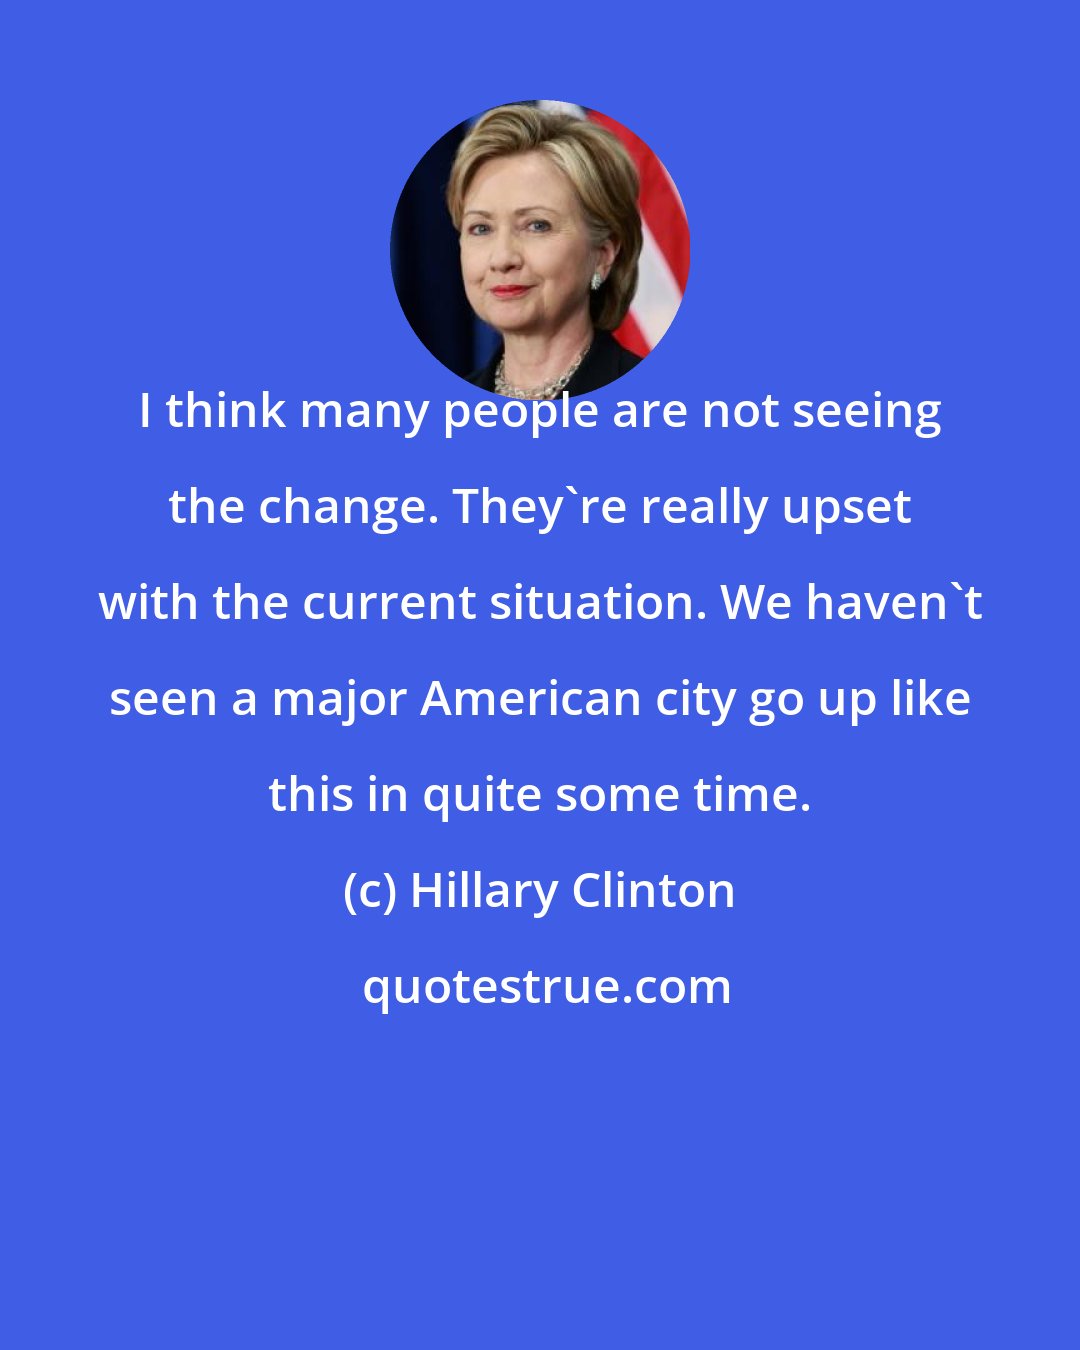 Hillary Clinton: I think many people are not seeing the change. They`re really upset with the current situation. We haven`t seen a major American city go up like this in quite some time.